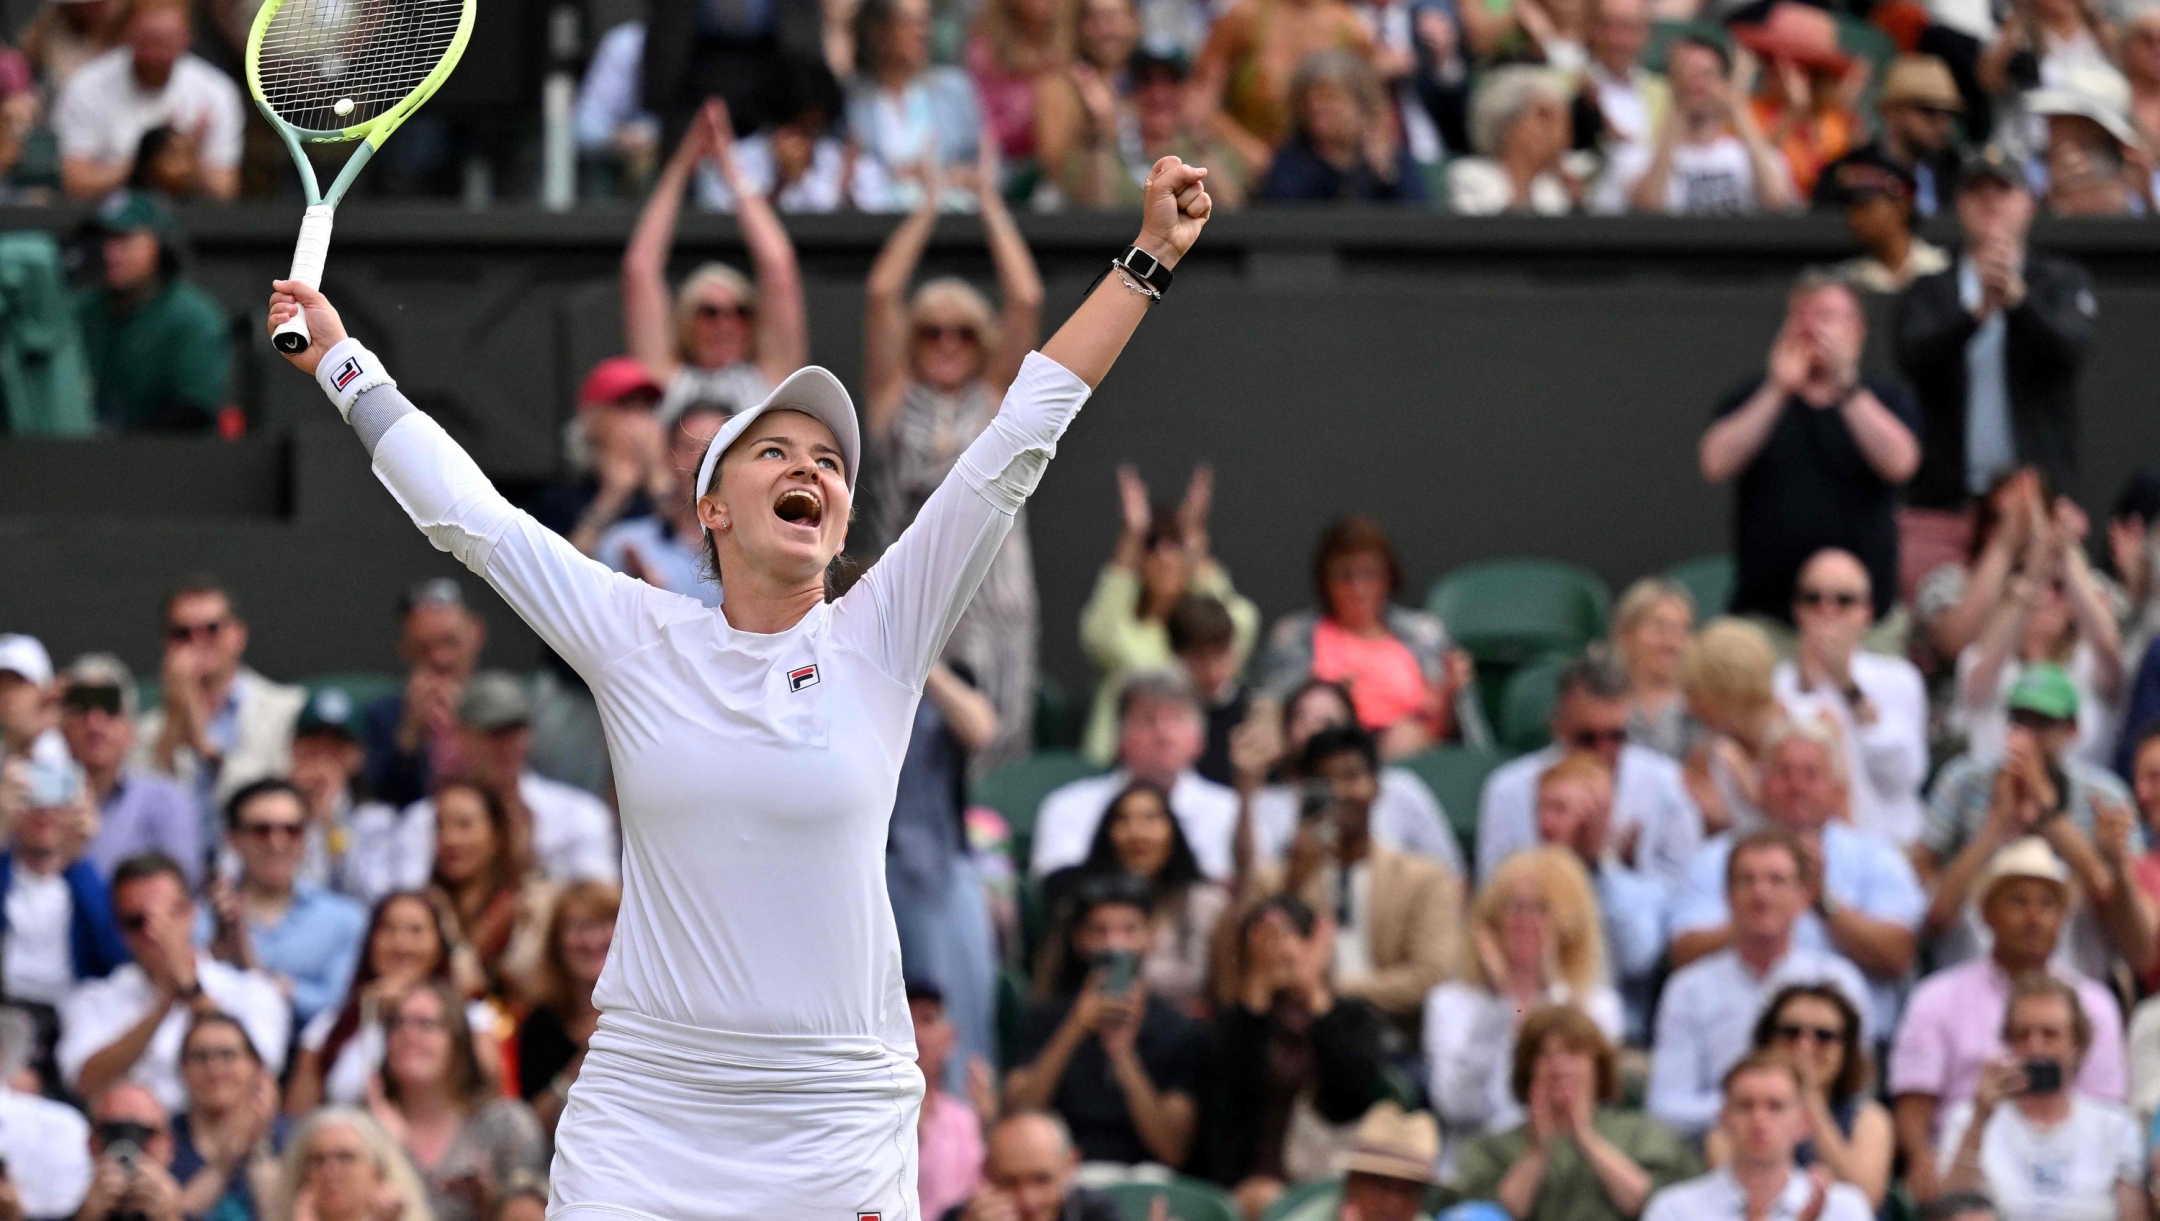 Czech Republic's Barbora Krejcikova celebrates winning against Kazakhstan's Elena Rybakina during their women's singles semi-final tennis match on the eleventh day of the 2024 Wimbledon Championships at The All England Lawn Tennis and Croquet Club in Wimbledon, southwest London, on July 11, 2024. Barbora Krejcikova won 3-6, 6-3, 6-4. (Photo by ANDREJ ISAKOVIC / AFP) / RESTRICTED TO EDITORIAL USE